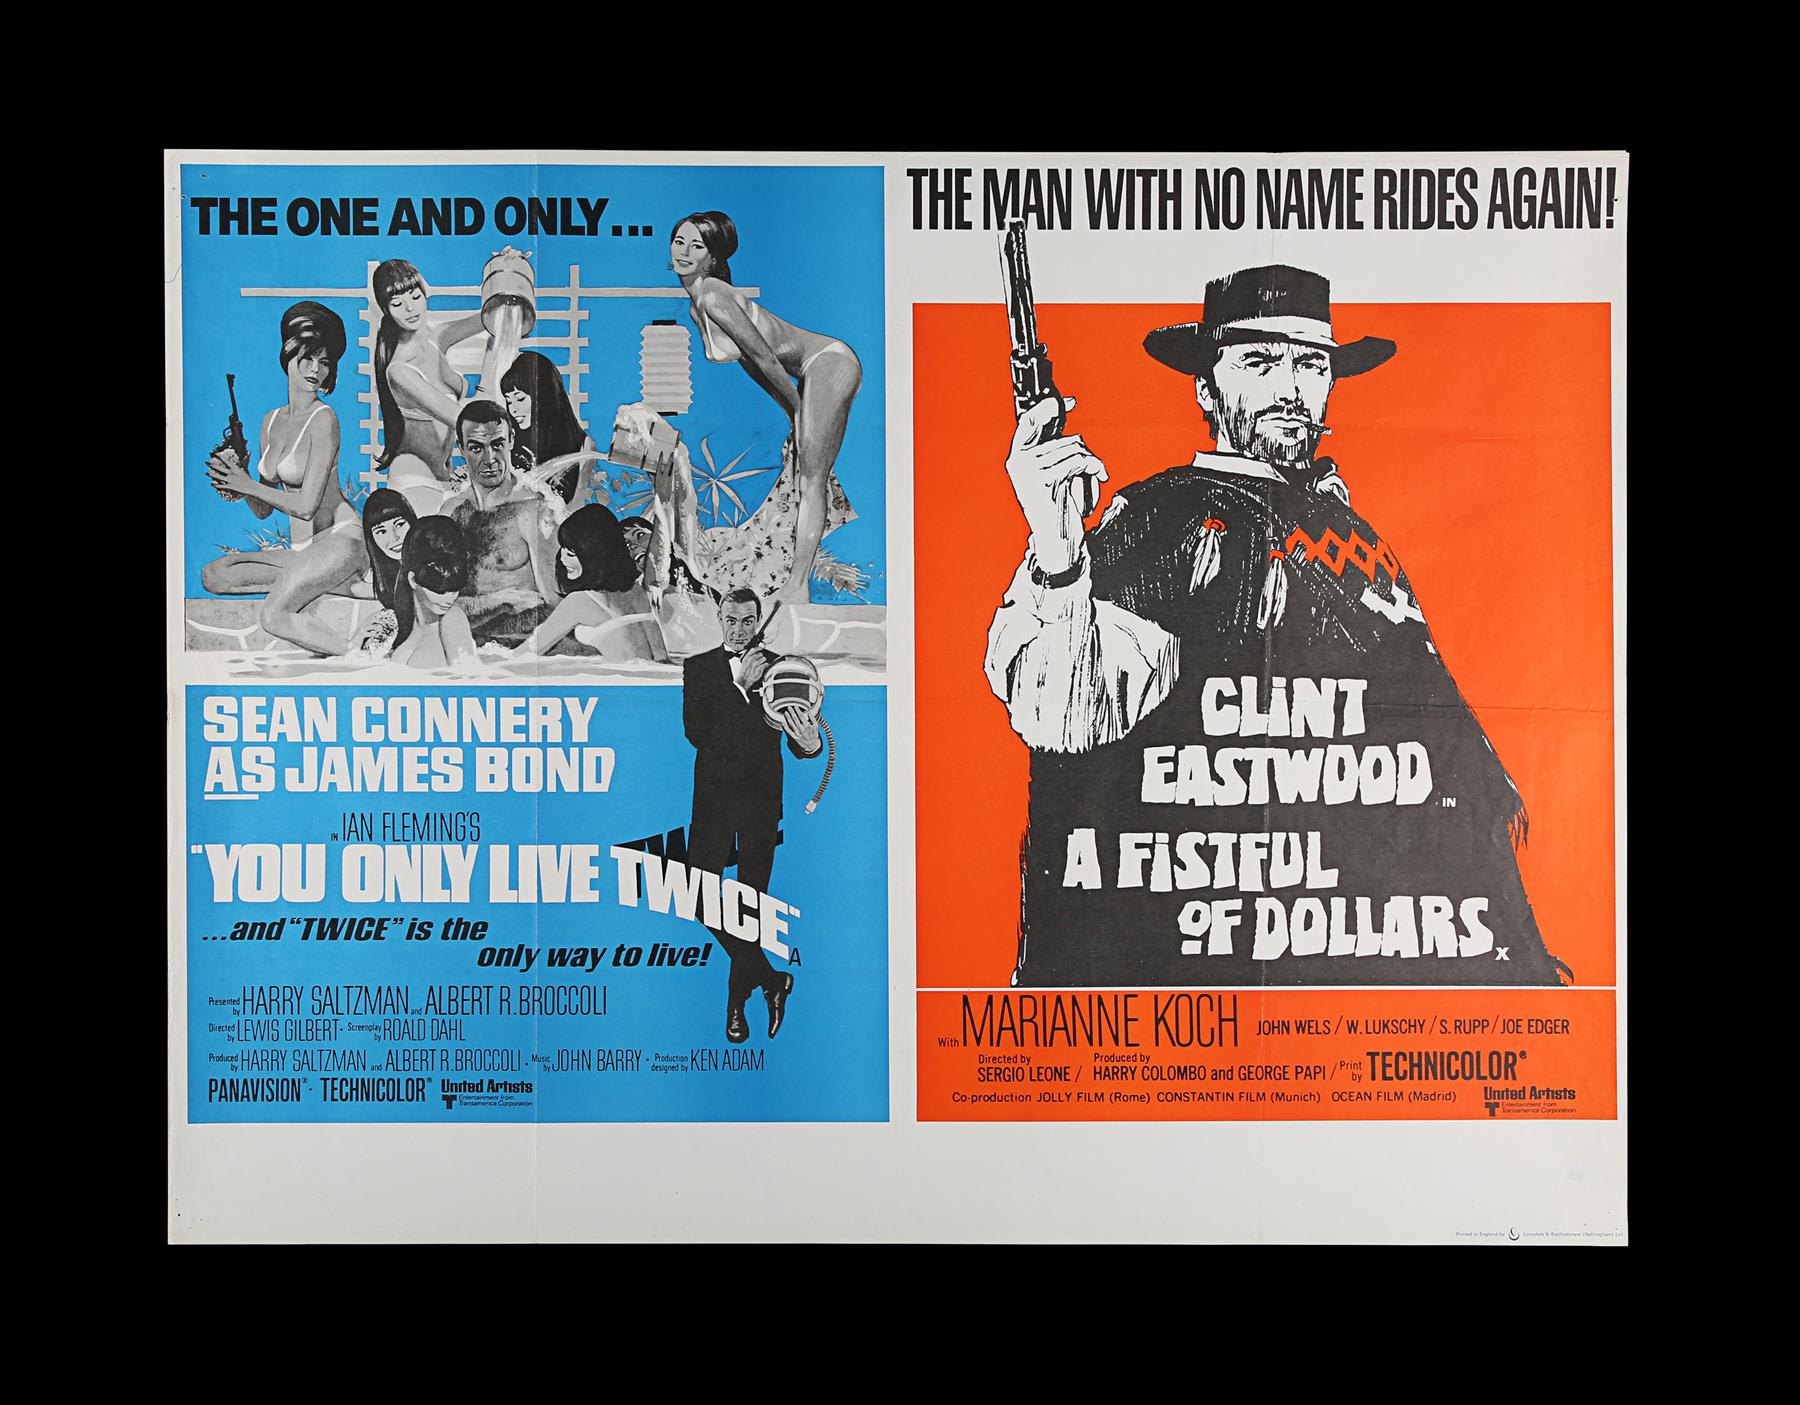 YOU ONLY LIVE TWICE (1967)/A FISTFUL OF DOLLARS (1967) - UK Quad Double-Bill Poster, 1971 Re-Release